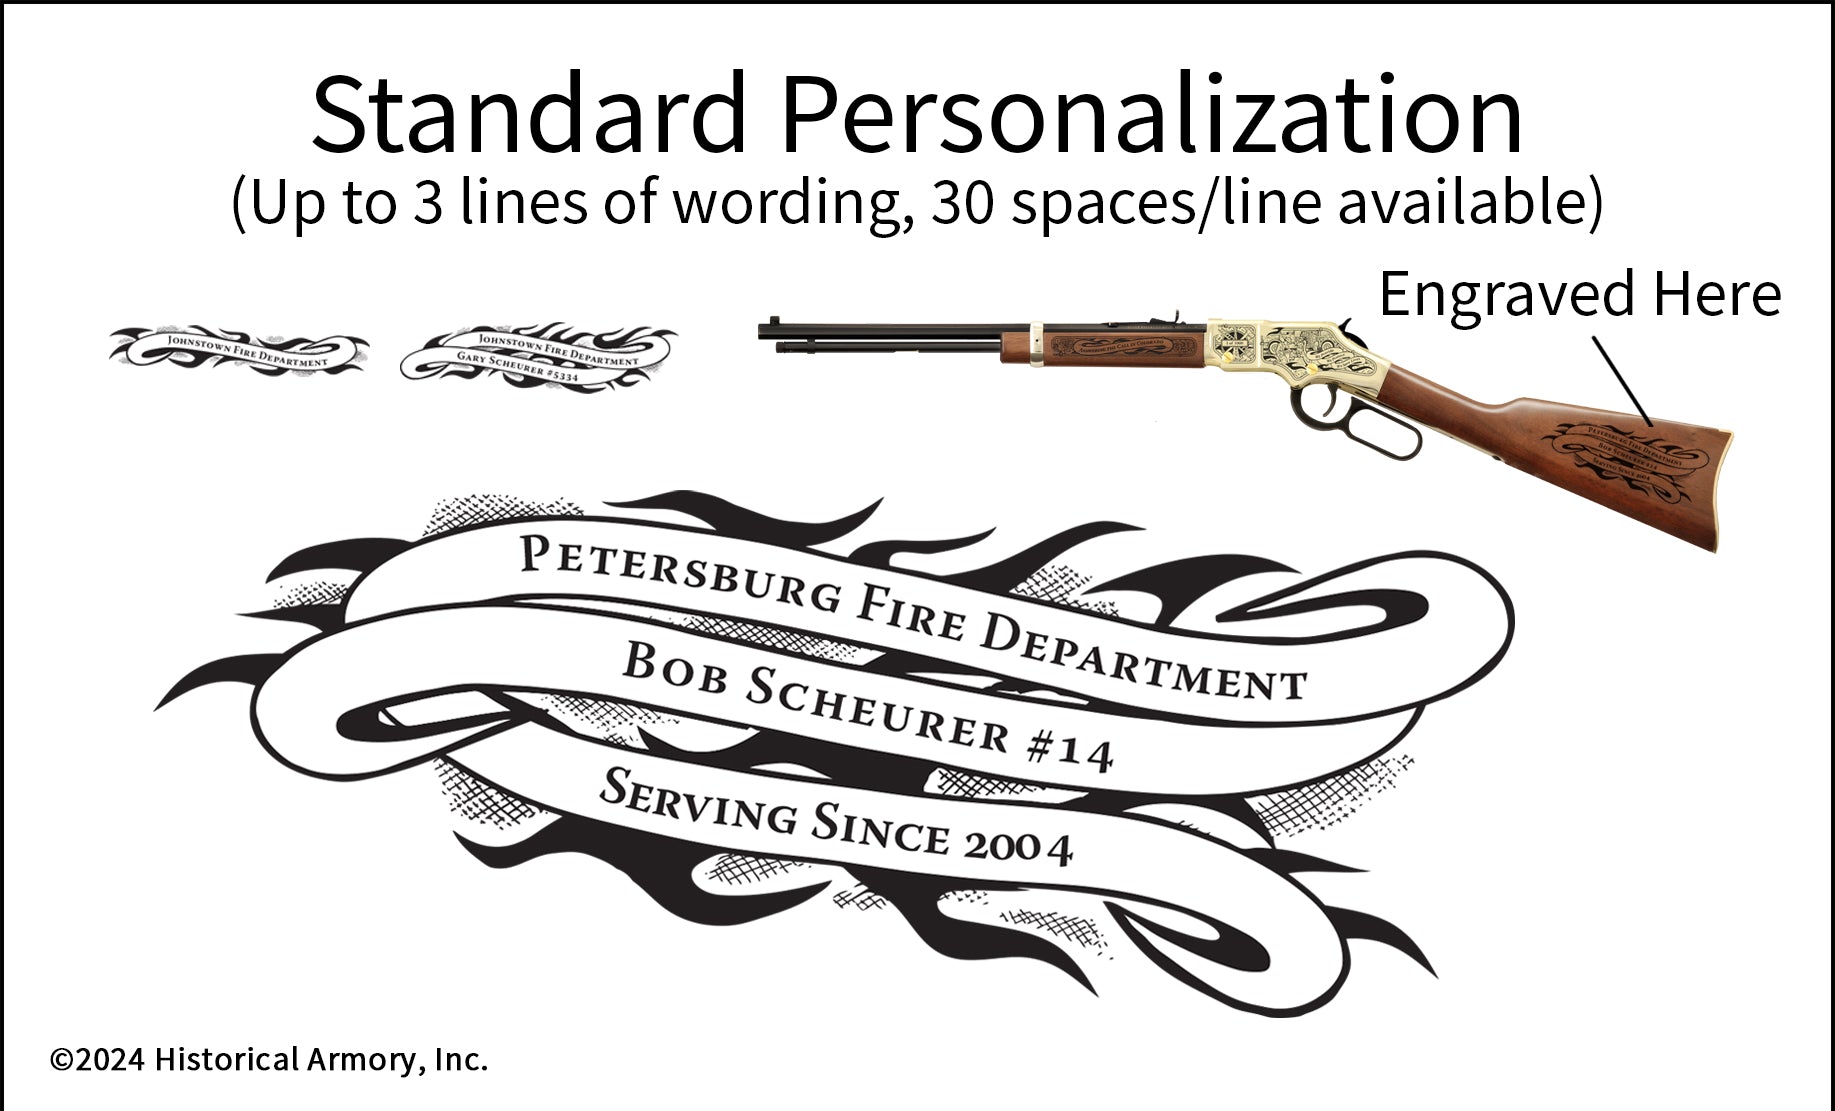 Firefighter Engineer Engraved Rifle Personalization